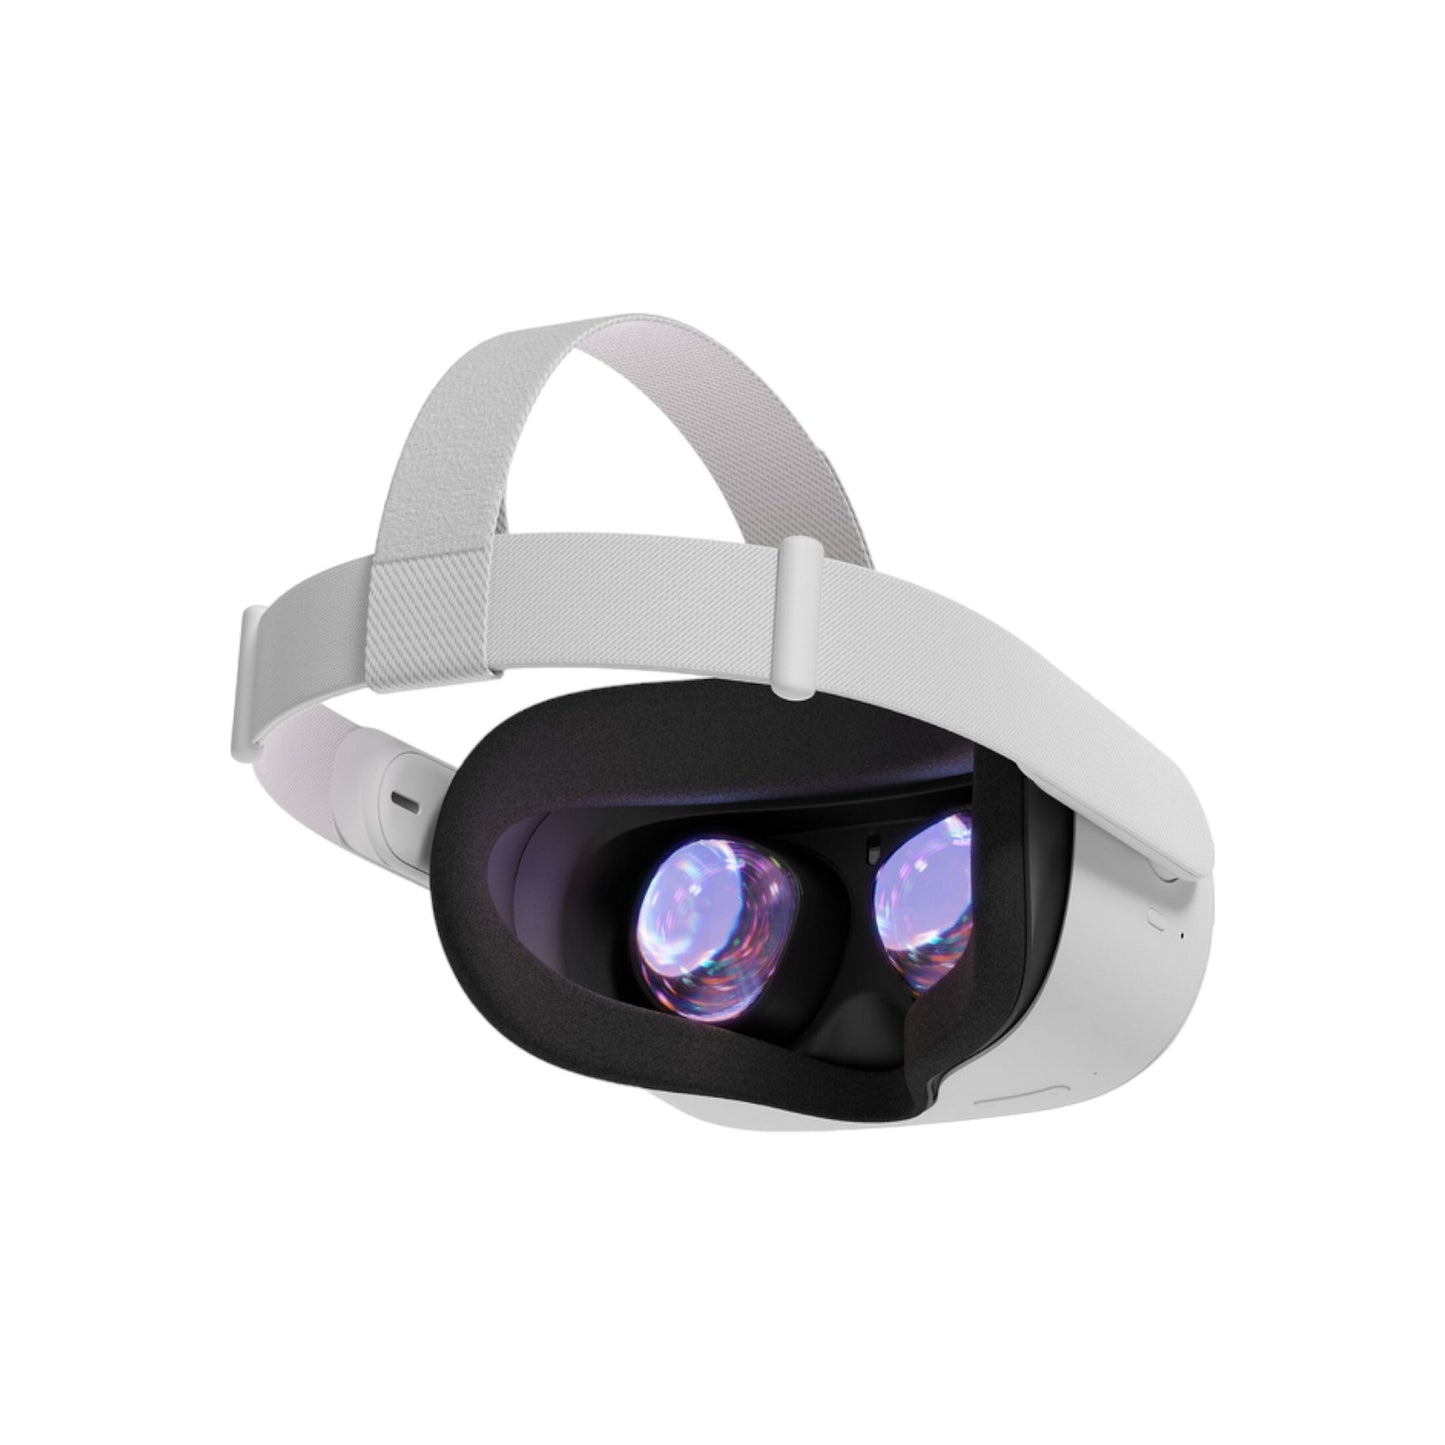 Meta Quest 2 - Advanced All-In-One Virtual Reality Headset 128 GB